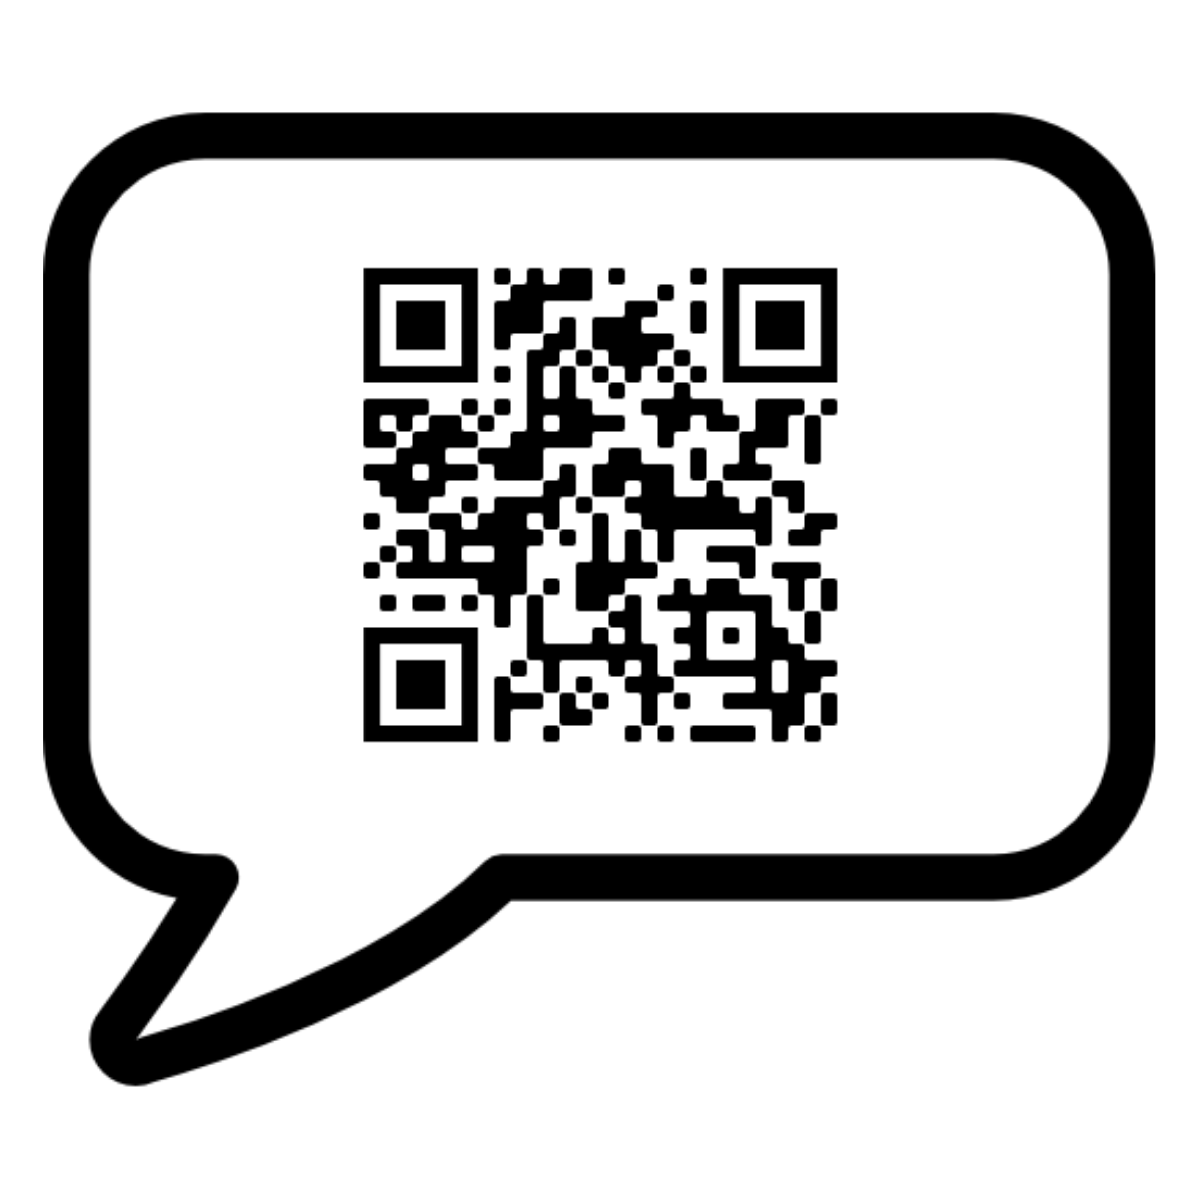 A QR code in a black thought bubble.